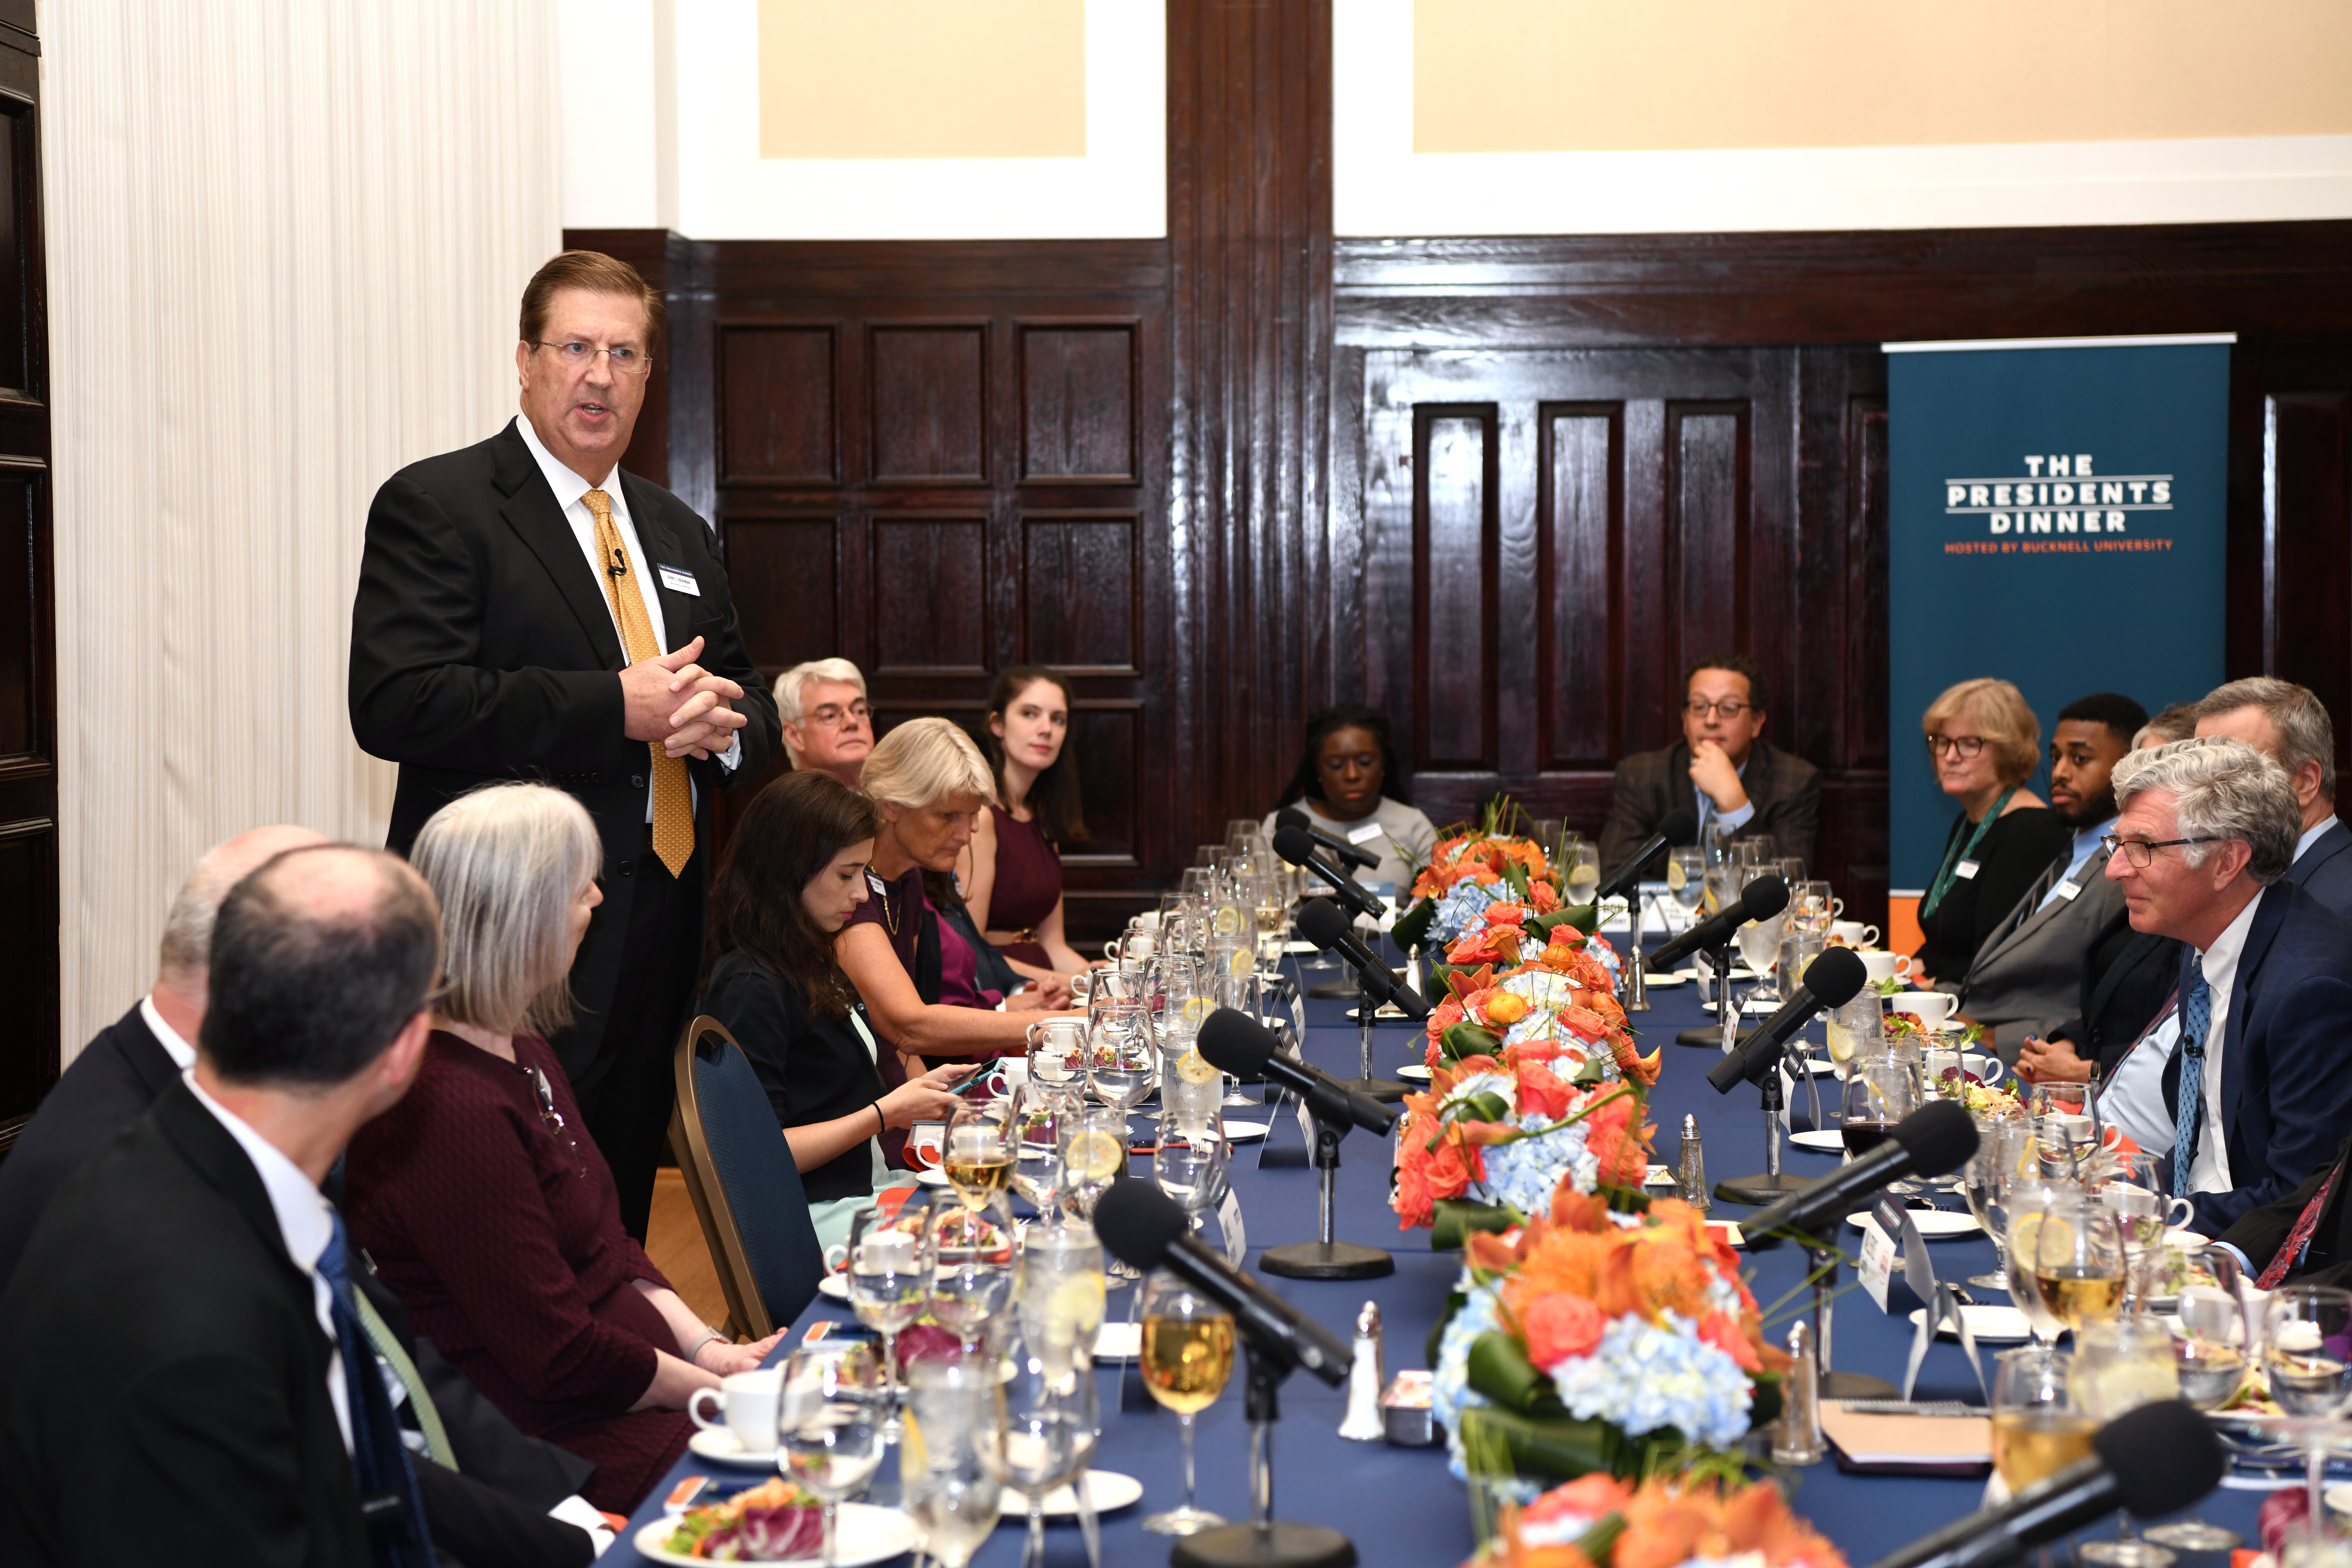 John Bravman, president of Bucknell University since 2010, led the discussion with his peers. Photo by Emily Paine